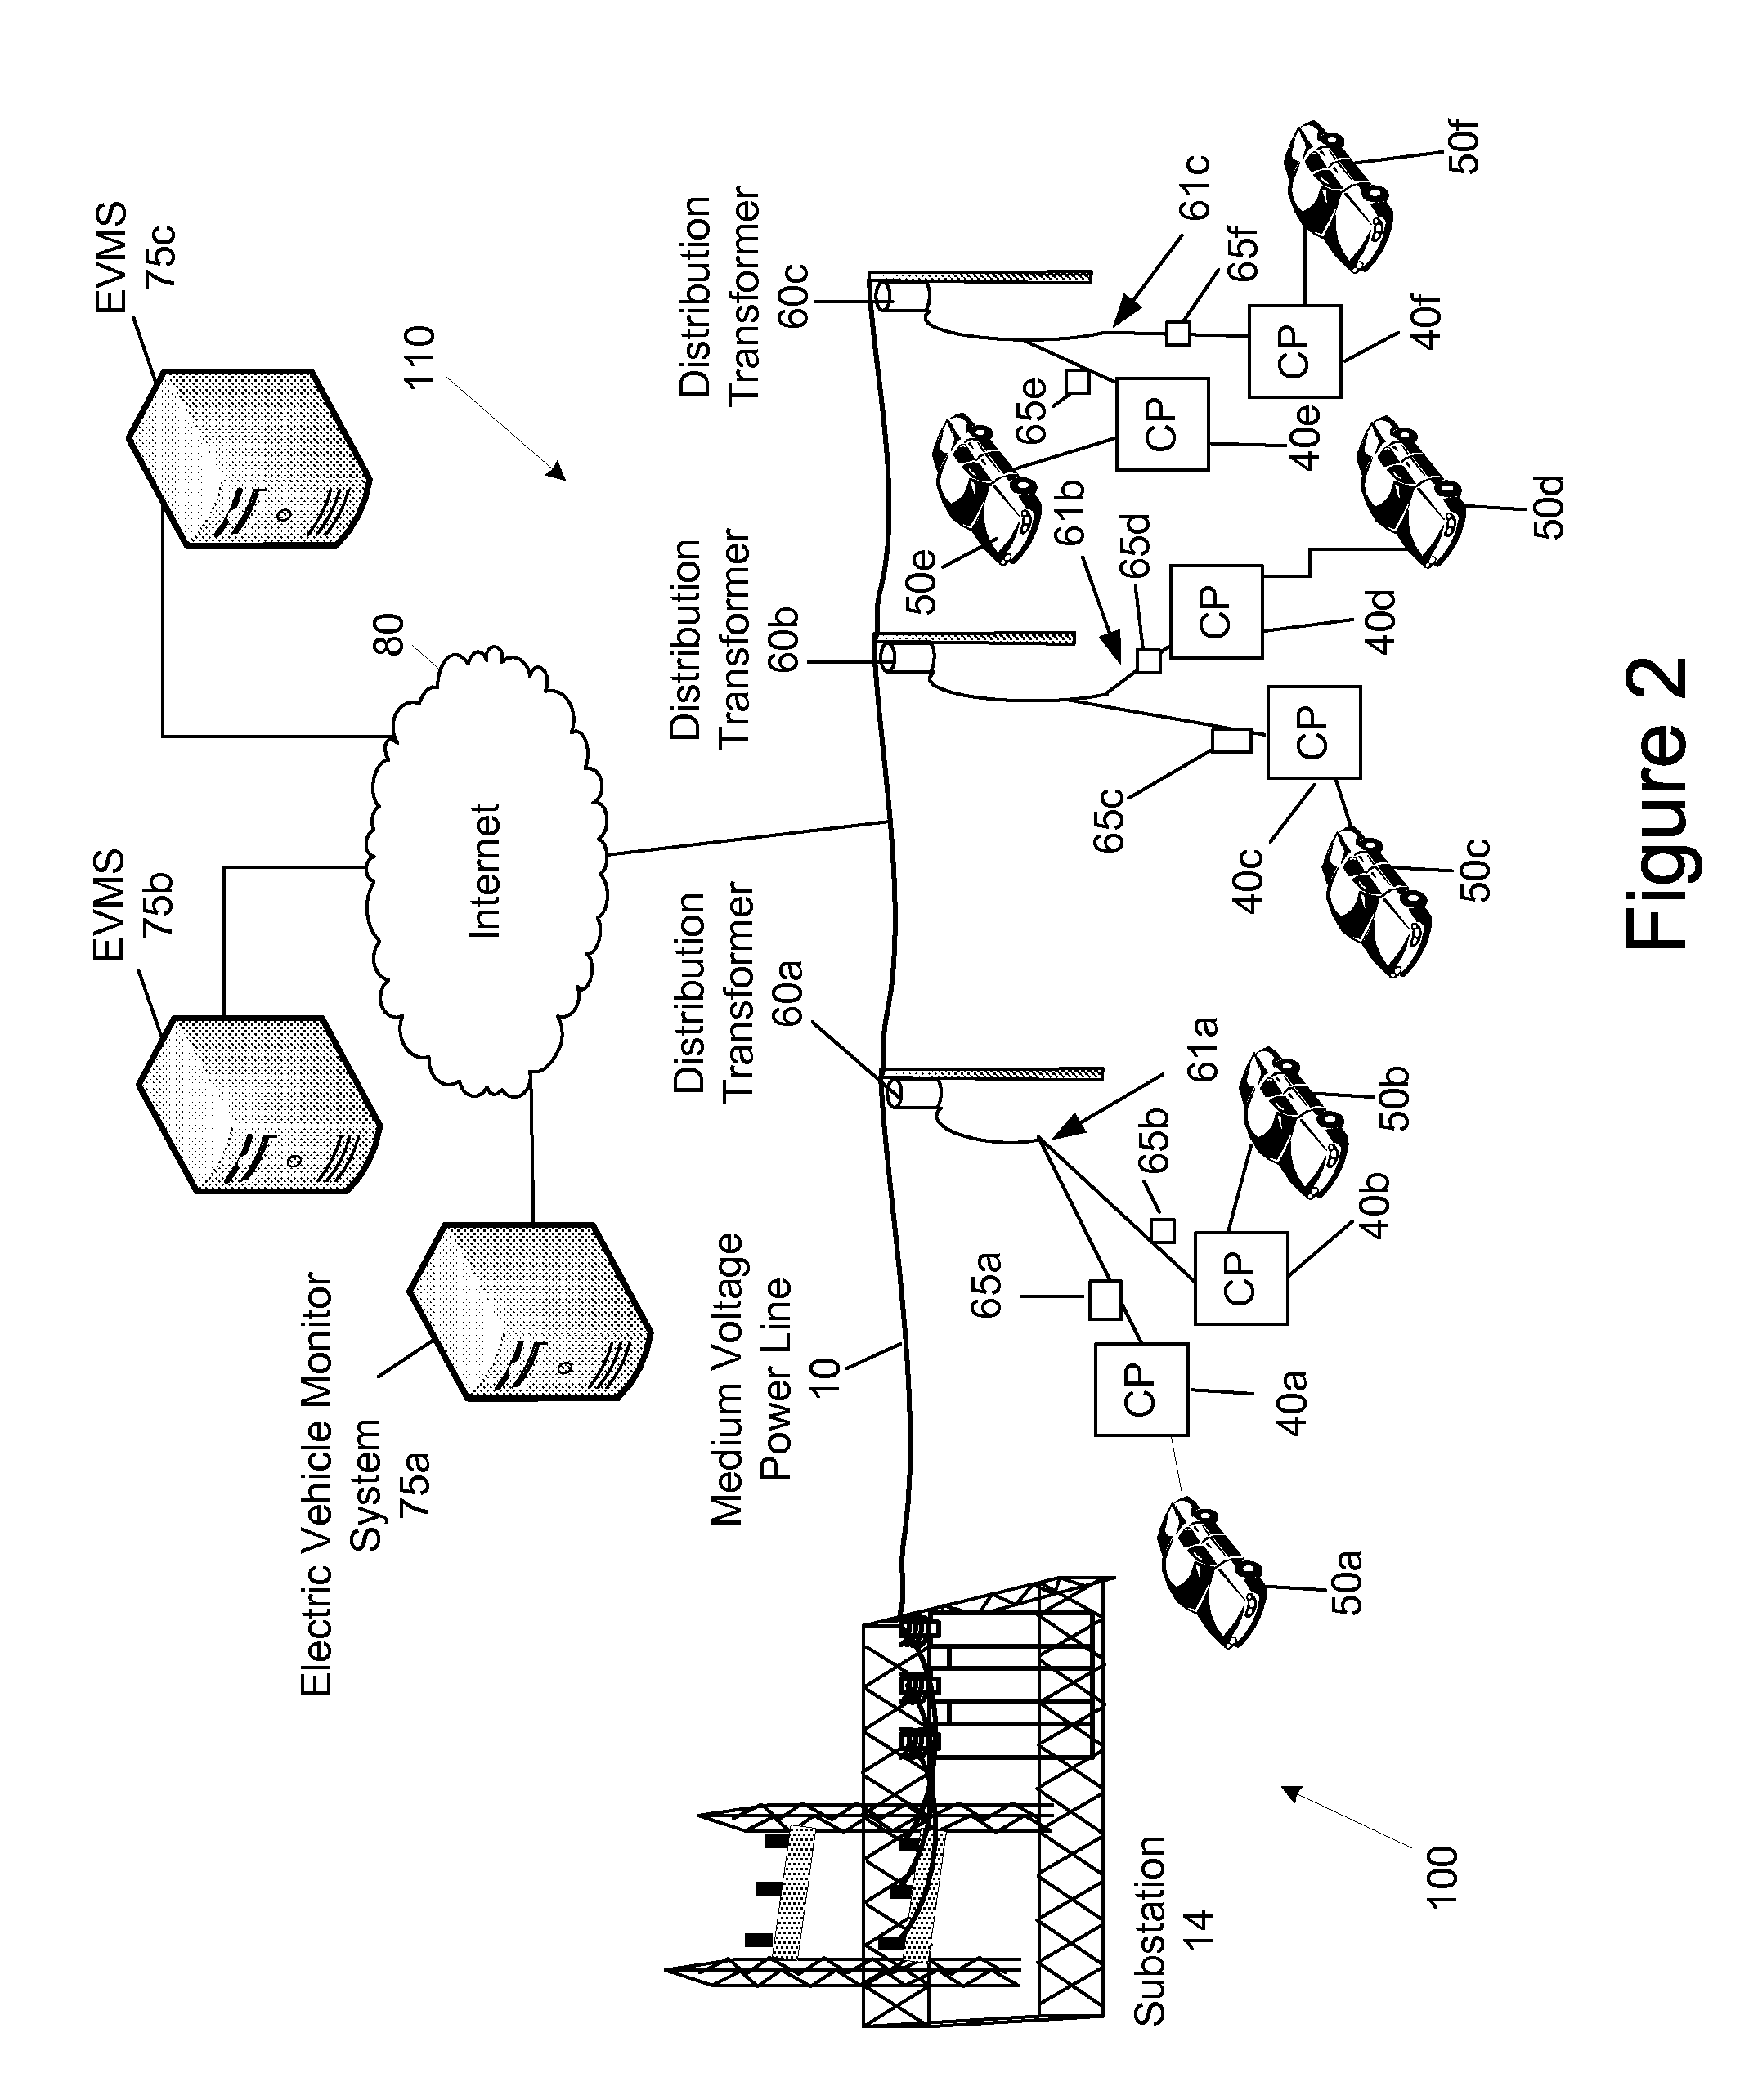 System and Method for Managing the Consumption and Discharging of Power of Electric Vehicles